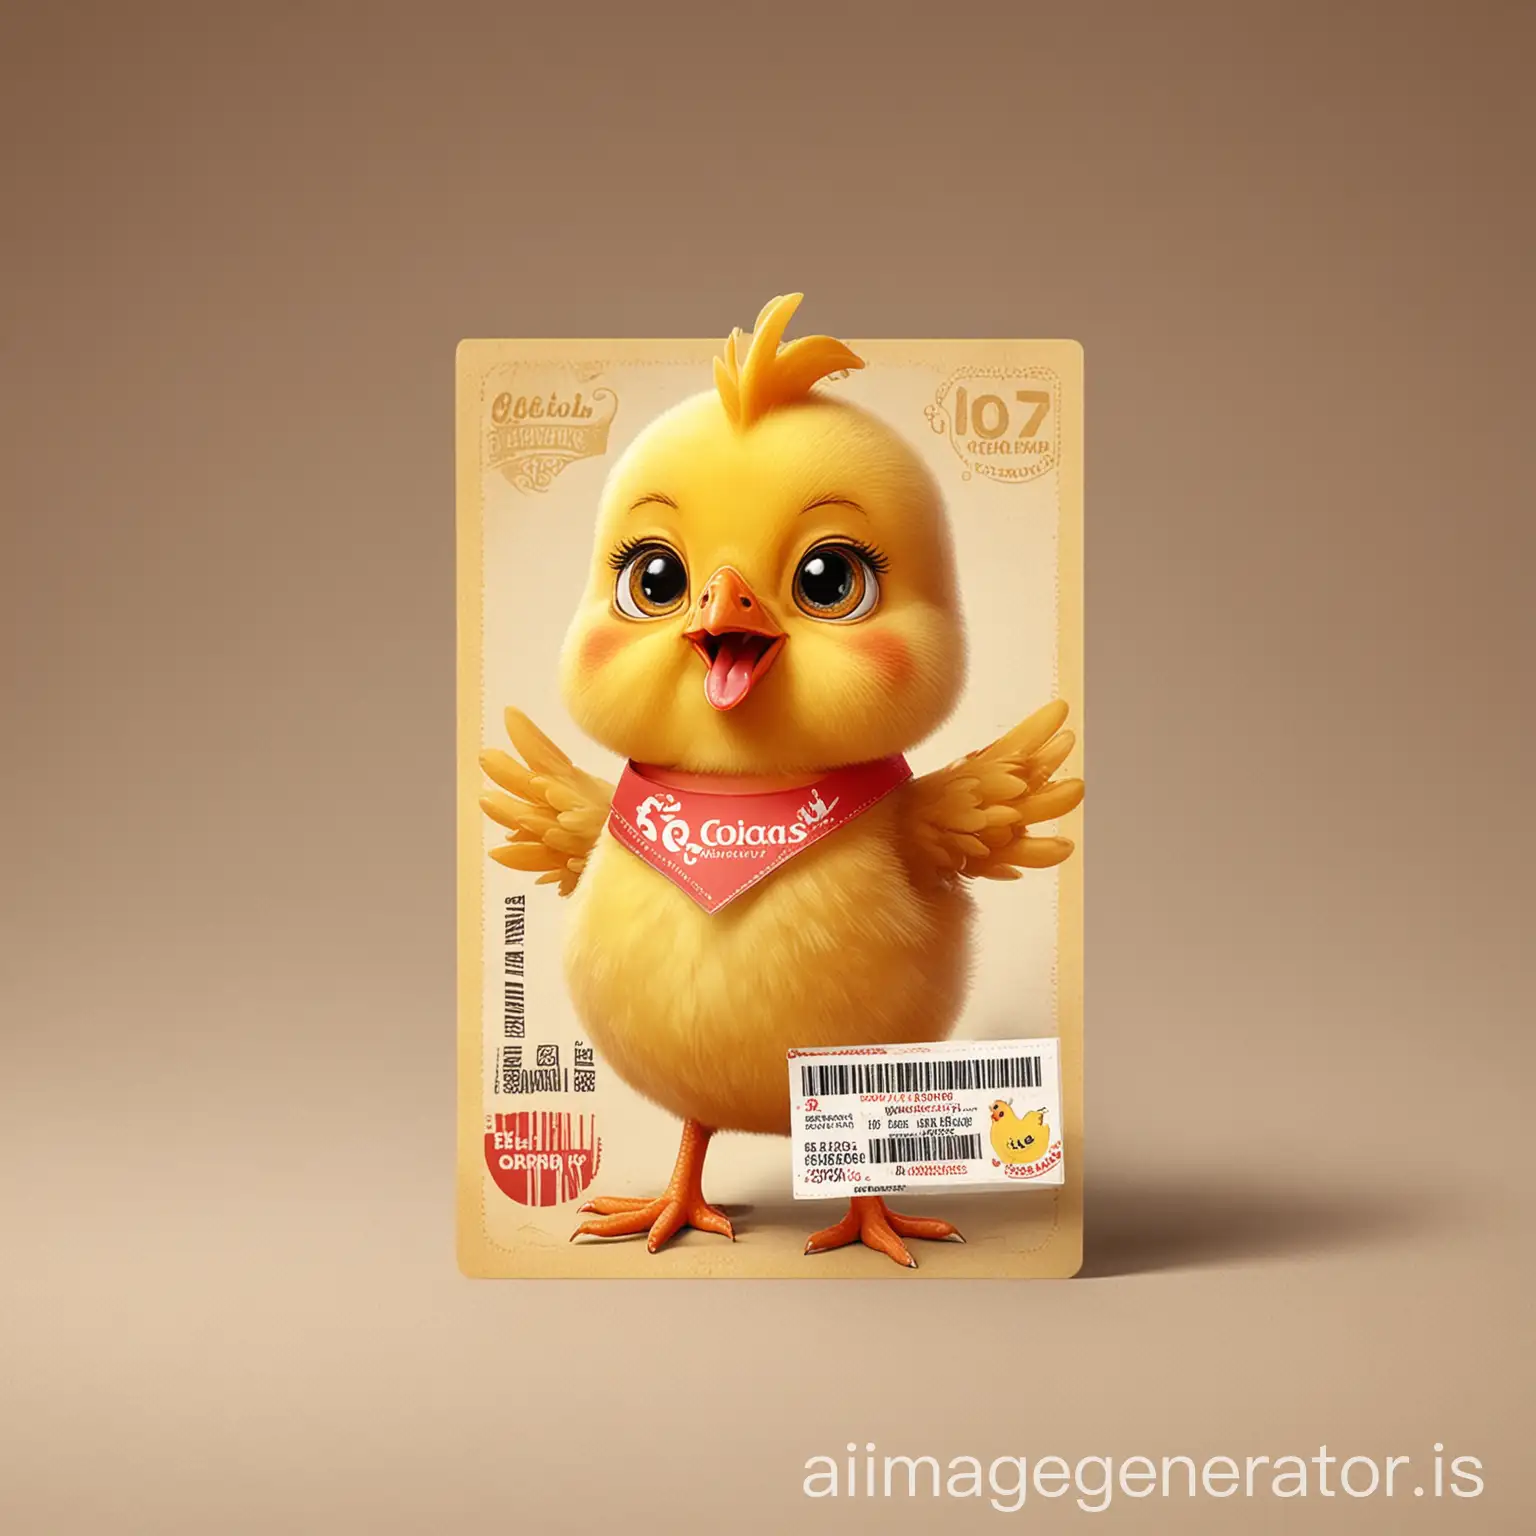 Adorable-Baby-Chicken-Cartoons-with-Food-and-Discount-Coupons